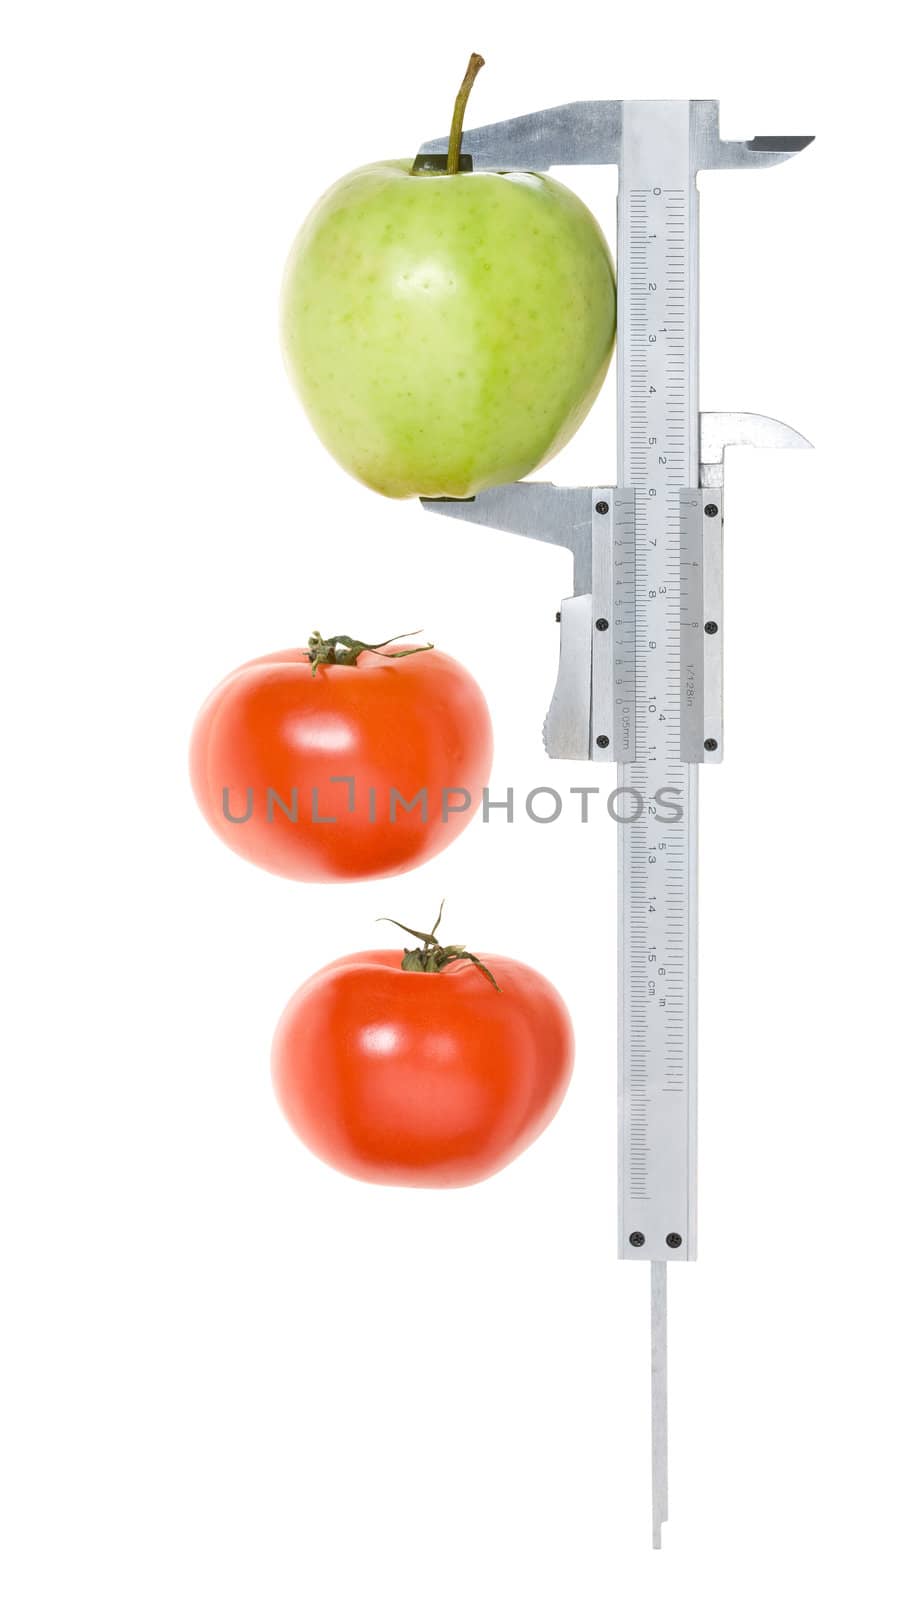 Tomato by fotoedgaras